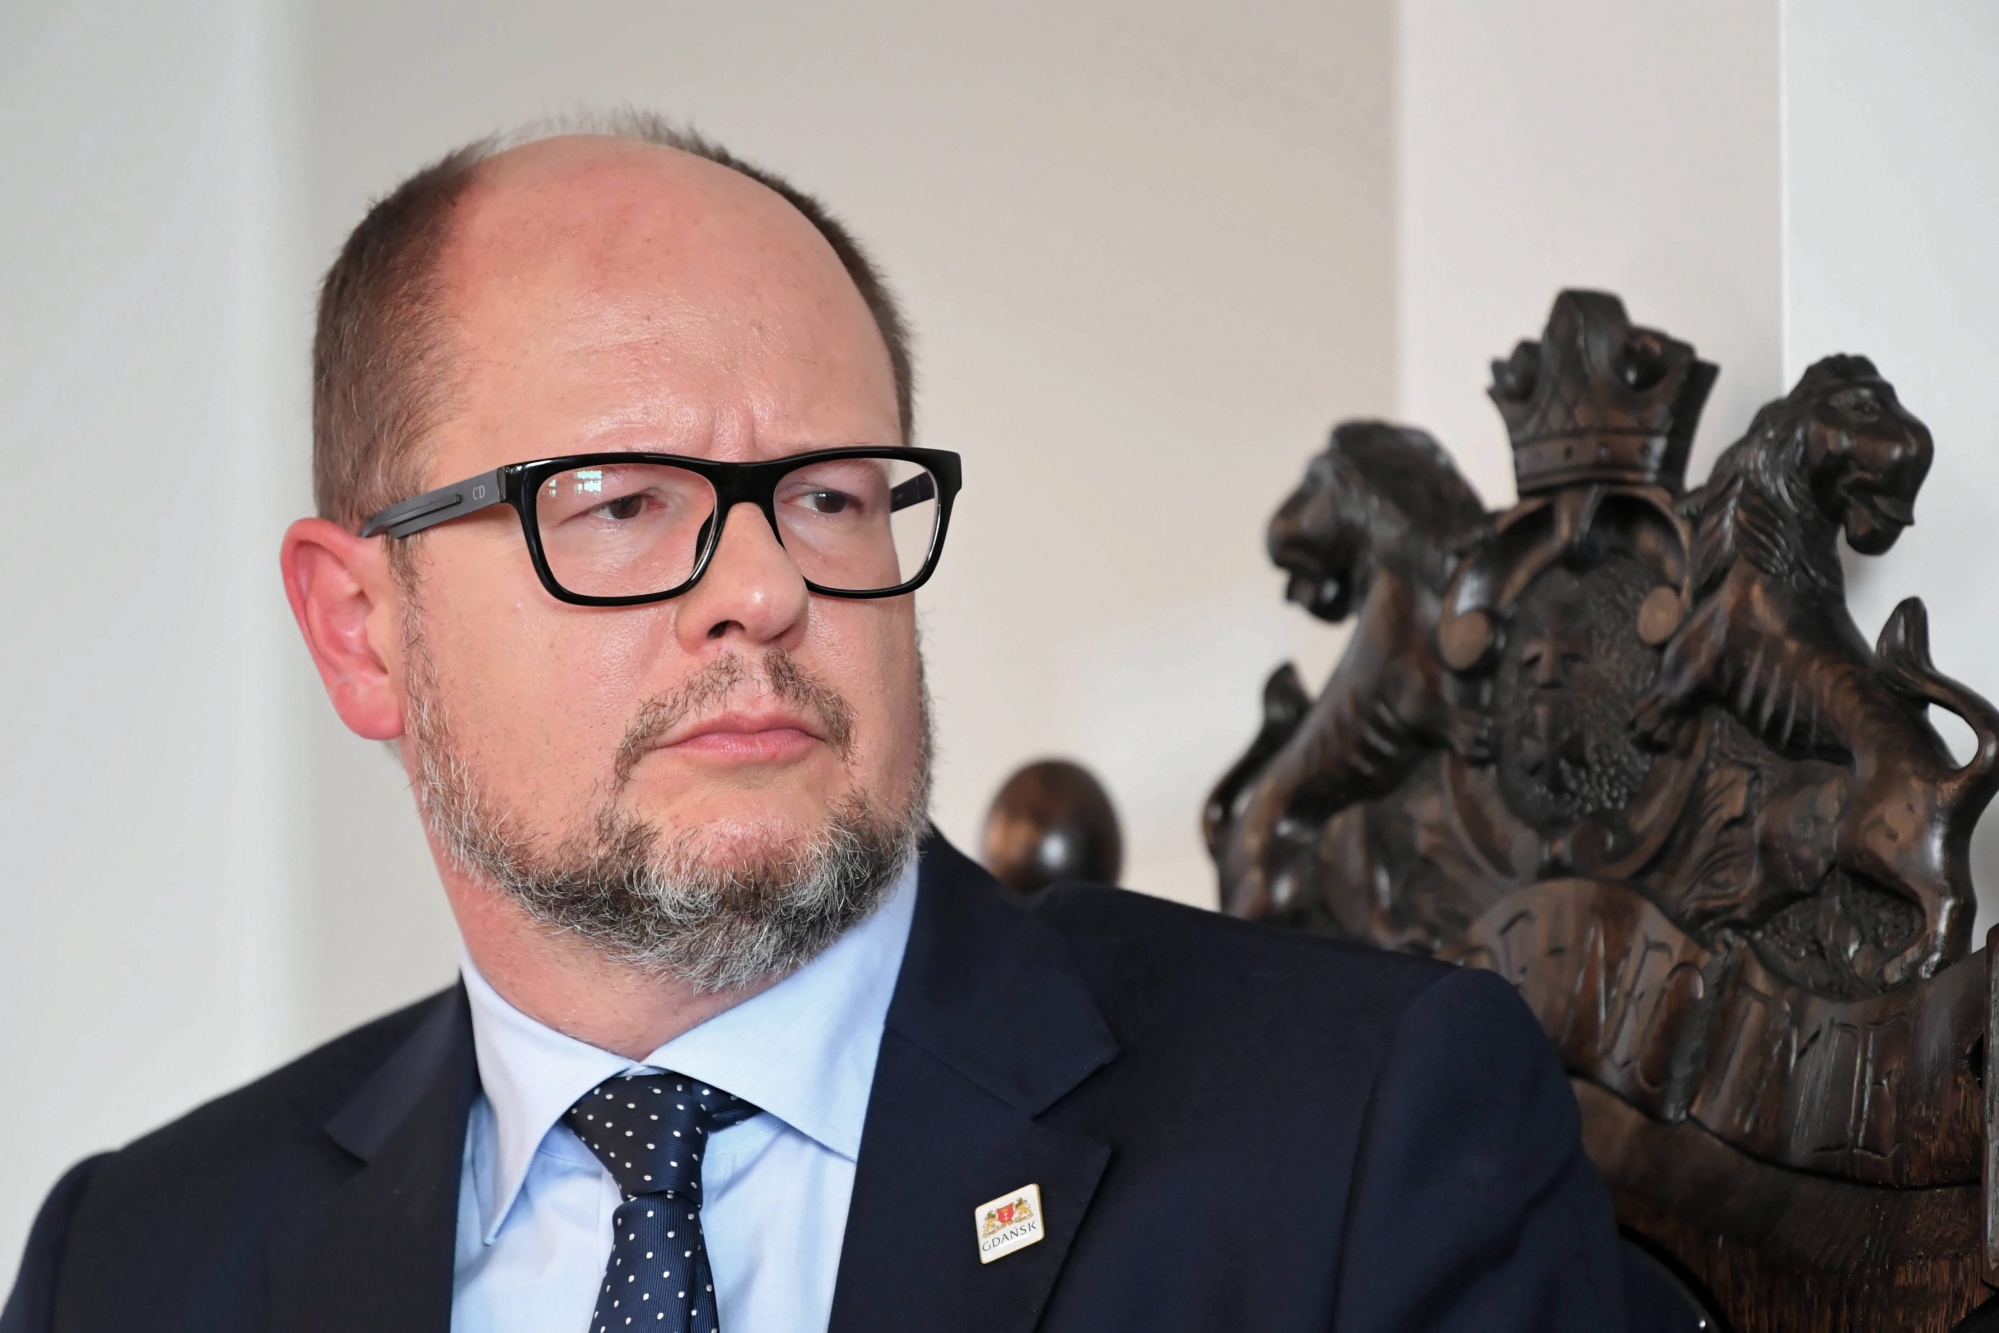 epa07283287  (FILE) - A file picture dated 10 September 2018 shows Mayor of Gdansk Pawel Adamowicz. Mayor of Gdansk Pawel Adamowicz, has died, on 14 January 2019  according to director for medical affairs of the Medical University of Gdansk hospital Tomasz Stefaniak. On the evening of 13 January, Pawel Adamowicz was stabbed by a convicted criminal who rushed onto the stage during the 27th finale of the Great Orchestra of Christmas Charity in Gdansk, Poland. Adamowicz was seriously injured in the heart and abdomen. Doctors reanimated Adamowicz on the spot and then transported him to the Medical University of Gdañsk hospital, where he underwent five hours of surgery.  EPA/Adam Warzawa POLAND OUT (FILE) POLAND PAWEL ADAMOWICZ OBIT